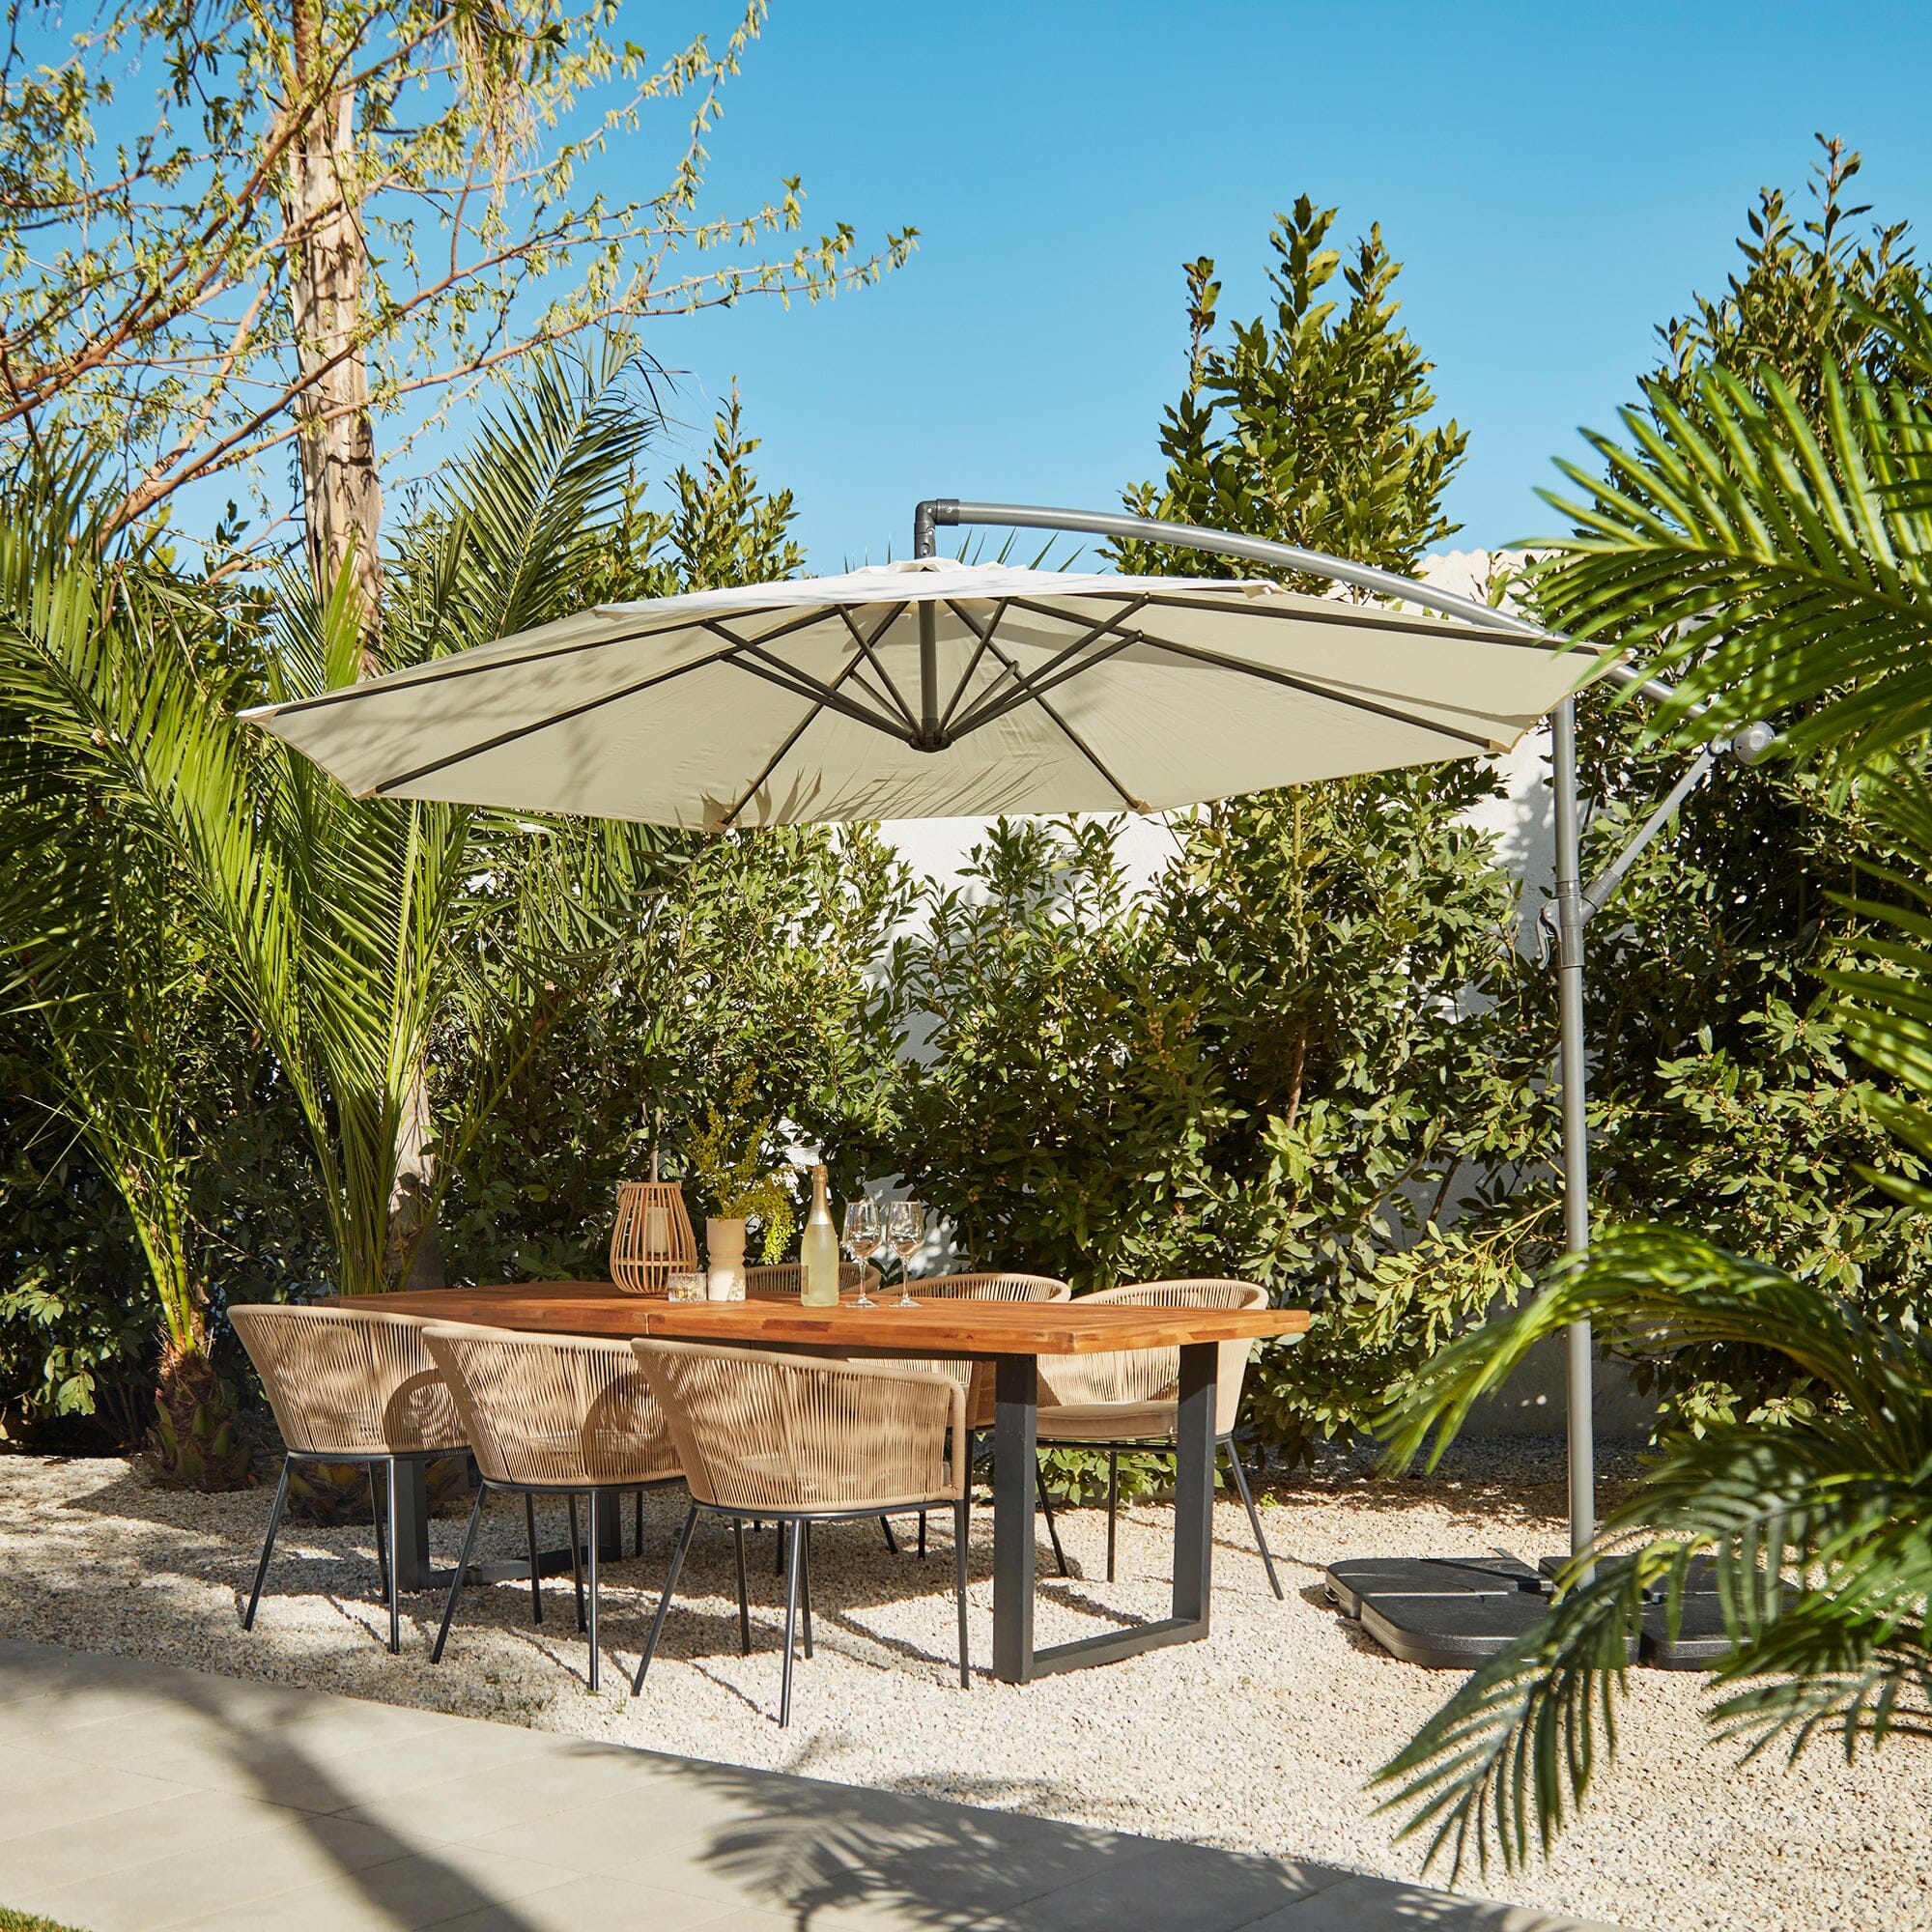 Hali Natural  6 Seater Outdoor Wooden Dining Set with Cream Parasol - 175cm